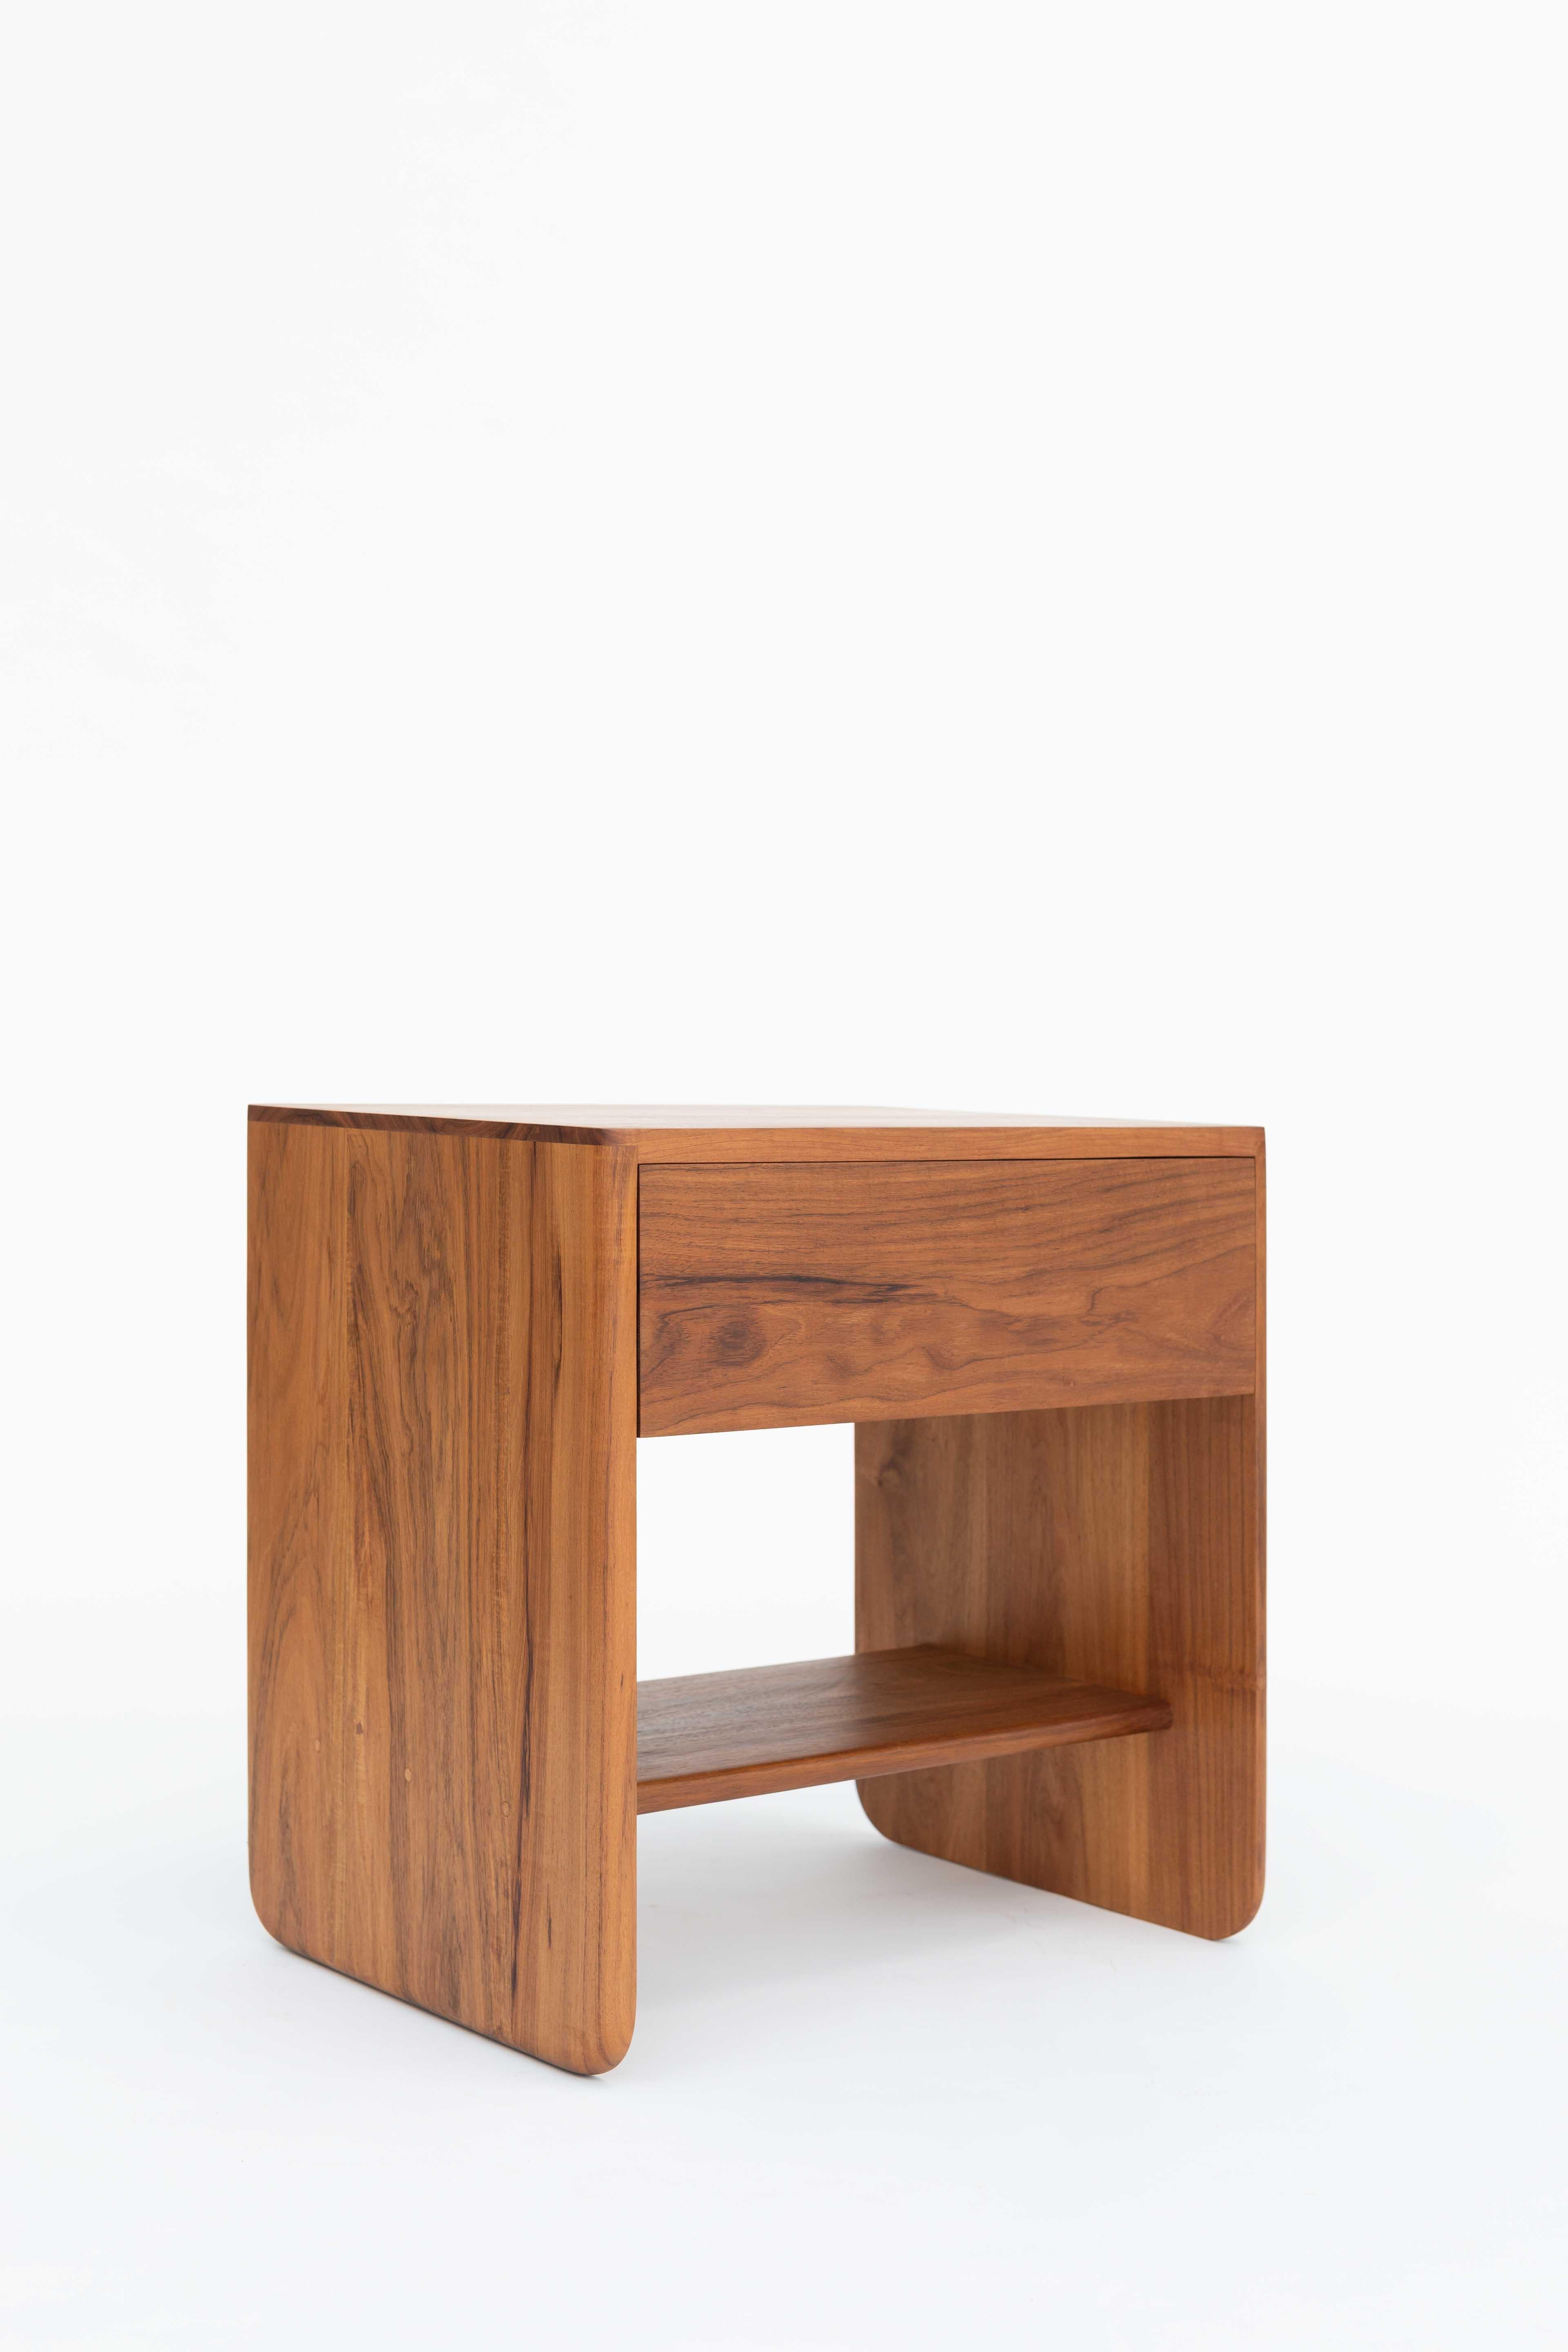 Hand-Crafted Minimalist Modern Nightstand in Solid Mexican Hardwood  For Sale